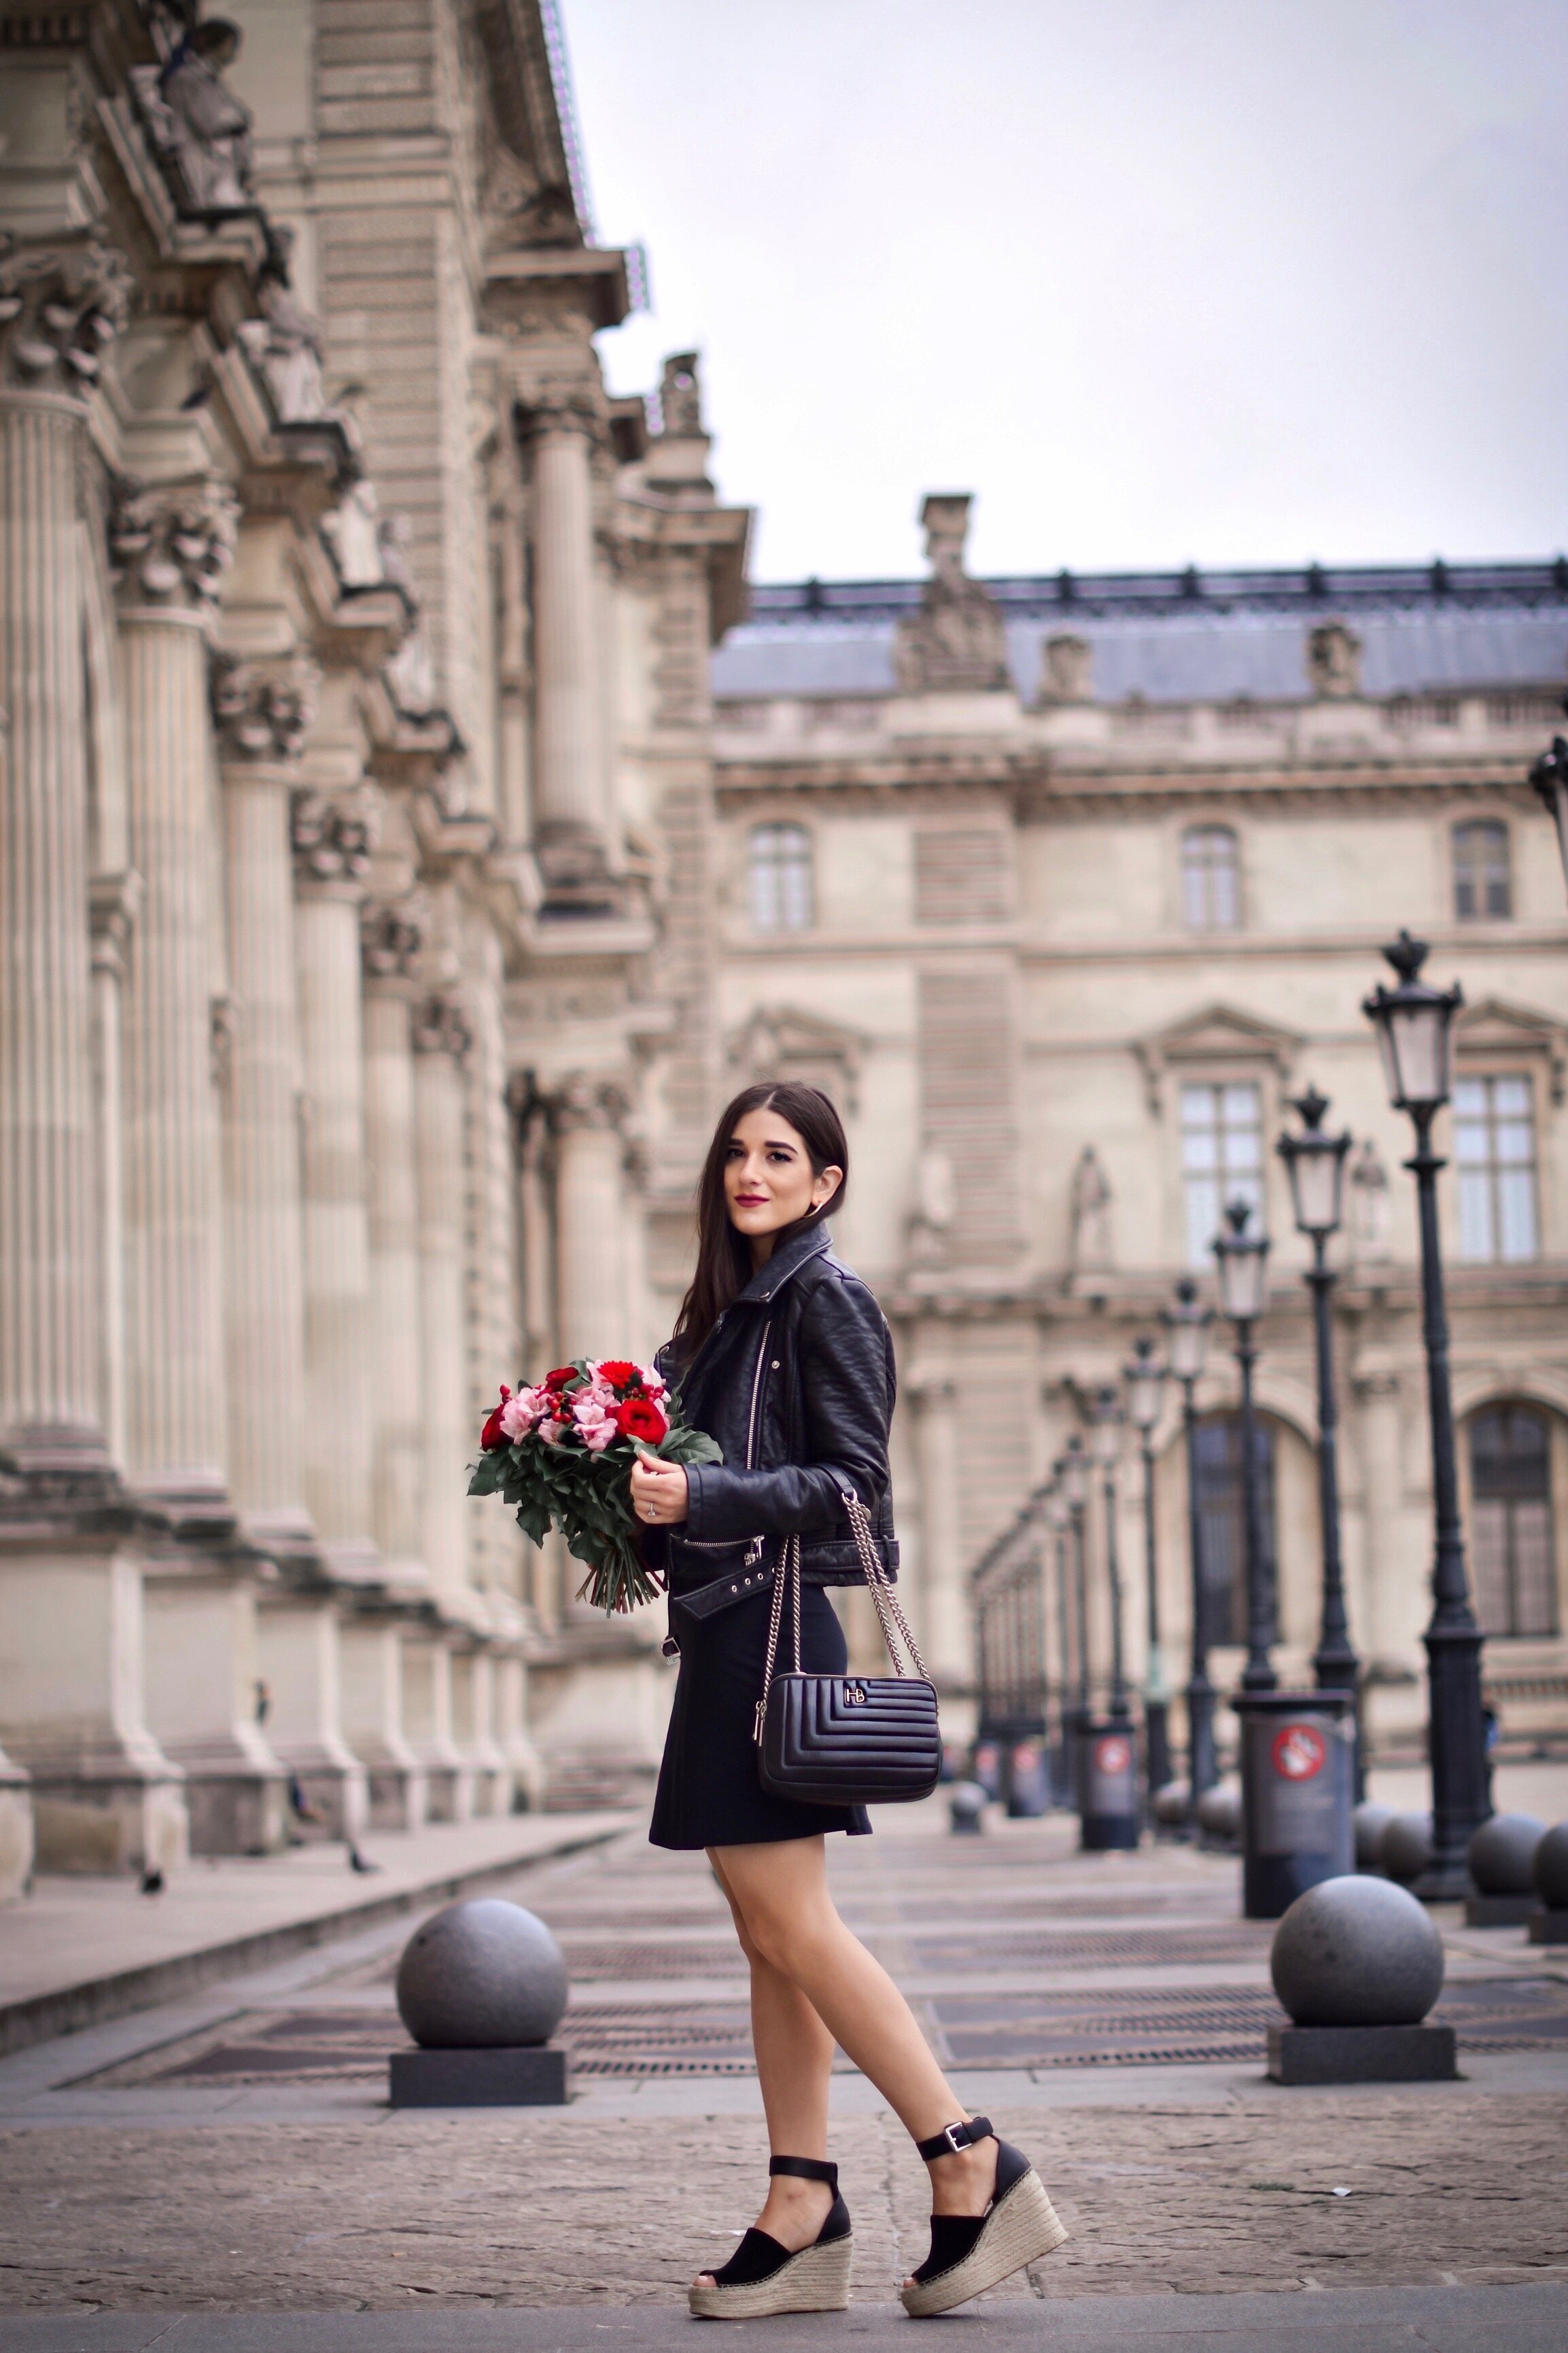 My Top 10 Favorite Spots In Paris Esther Santer NYC Street Style Blogger Travel Outfit What To Do Where To Go Tourist Attractions Saint Germain Moulin Rouge Black and White Pillars Eiffel Tower Versailles Laduree Saint Michel Recommendation France Bag.jpg